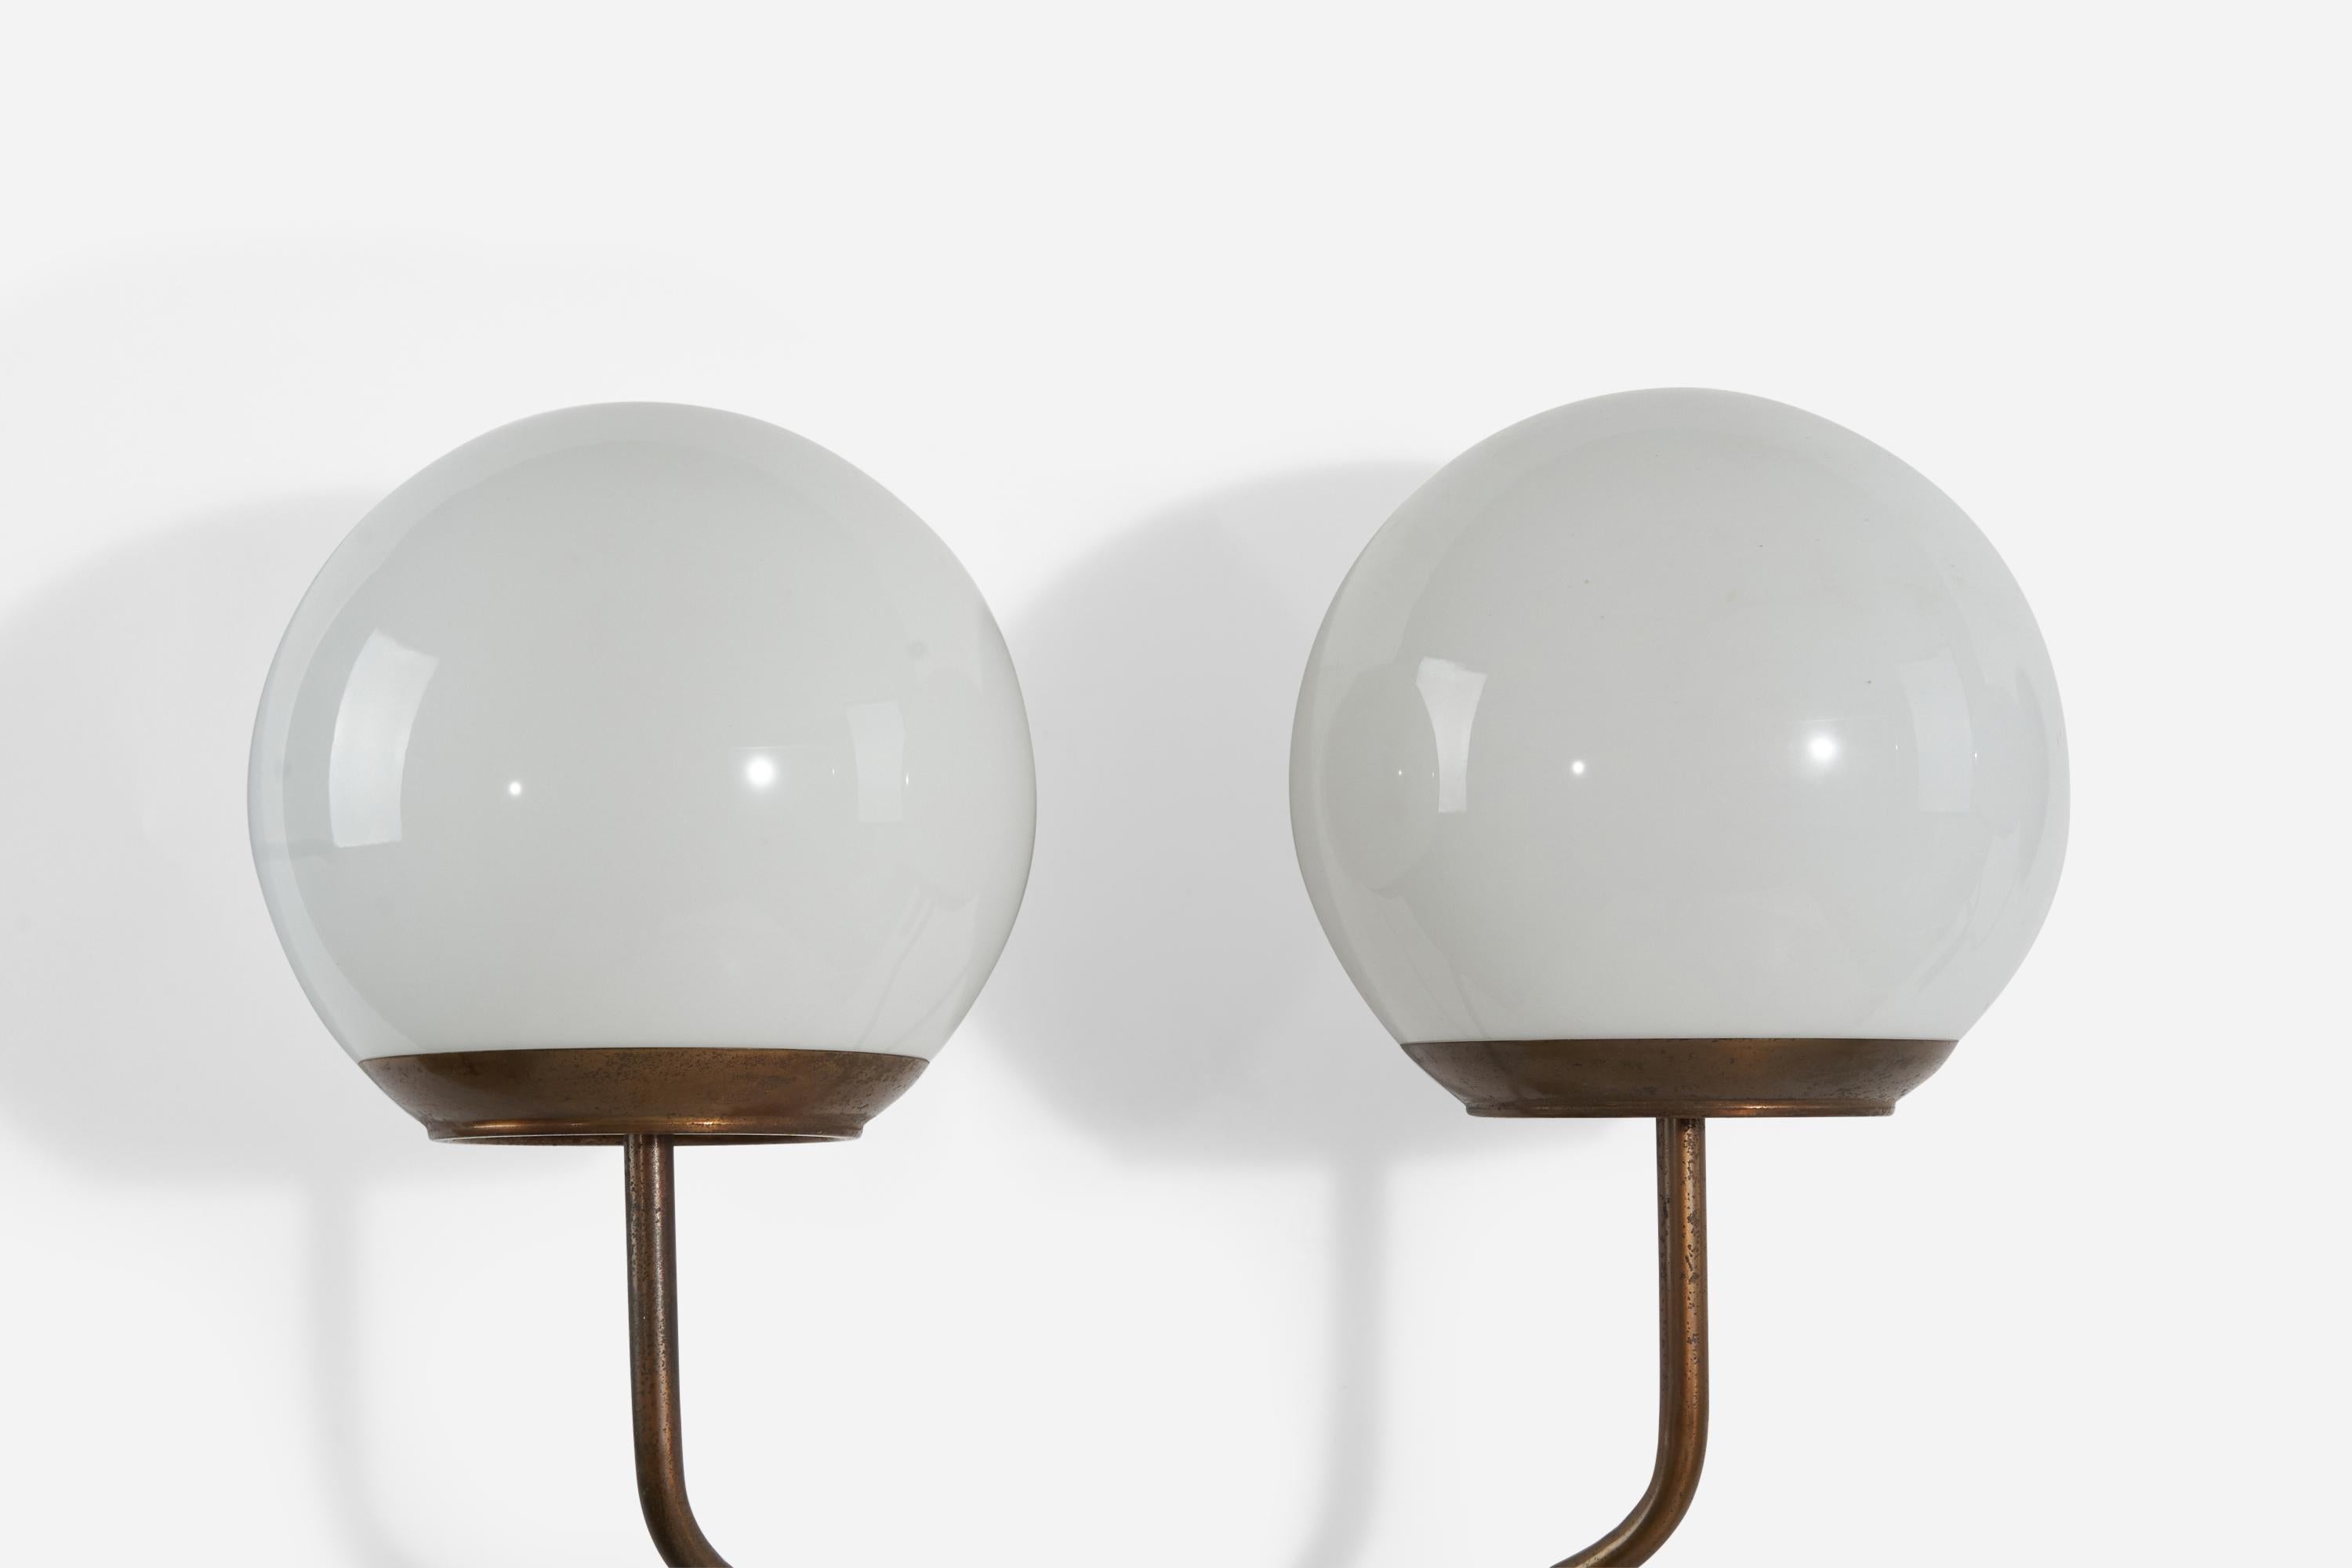 Mid-20th Century Italian Designer, Wall Lights, Brass, Glass, Italy, 1950s For Sale